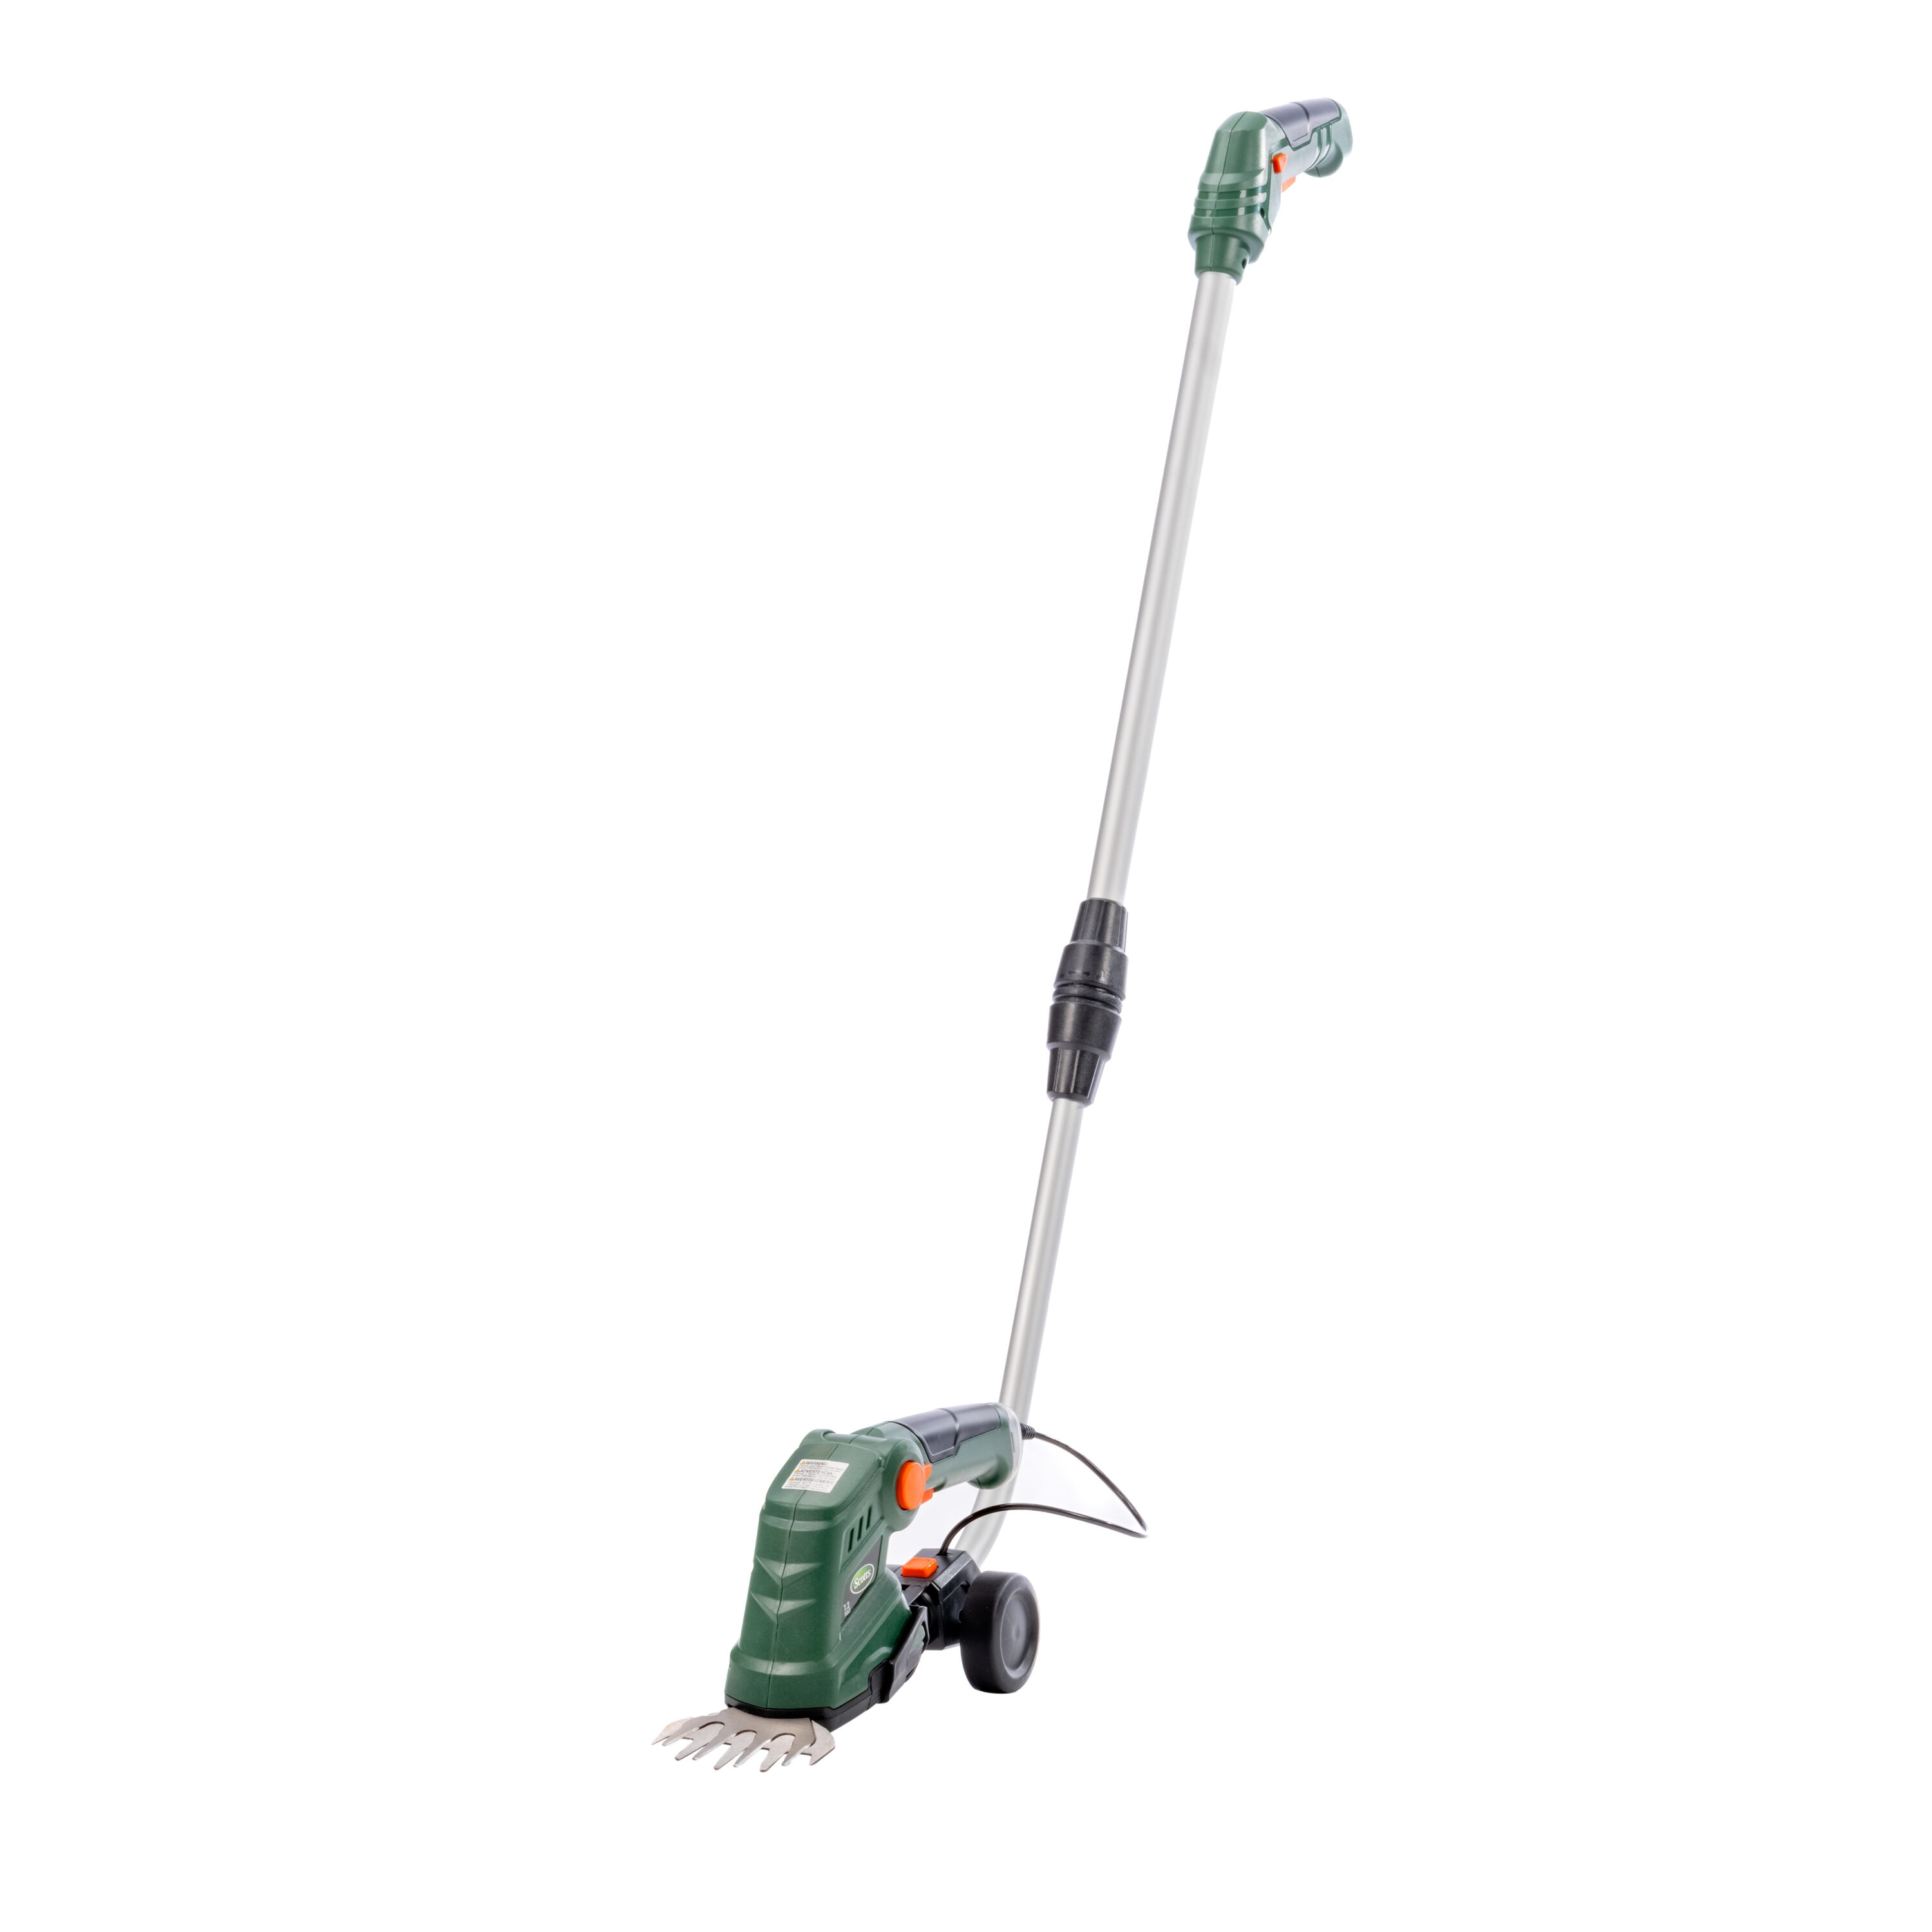 Lawn care kit- corded electric edger, hedger, and trimmer - Edgers